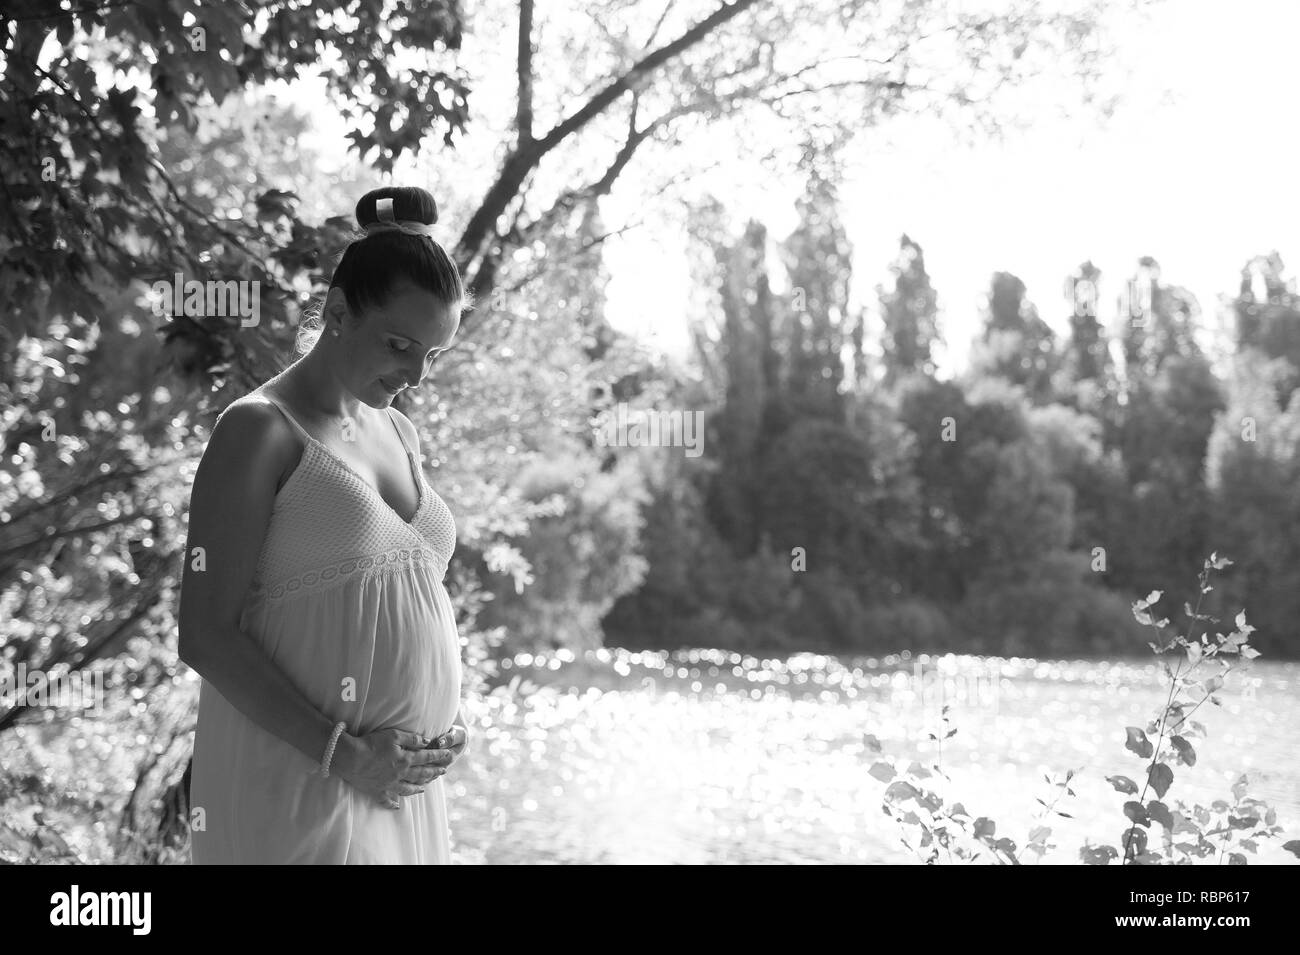 Milan, Italy - 20 july 2018: black and white portrait of young expecting woman with white dress holding her belly outdoors with sun reflecting on lake Stock Photo